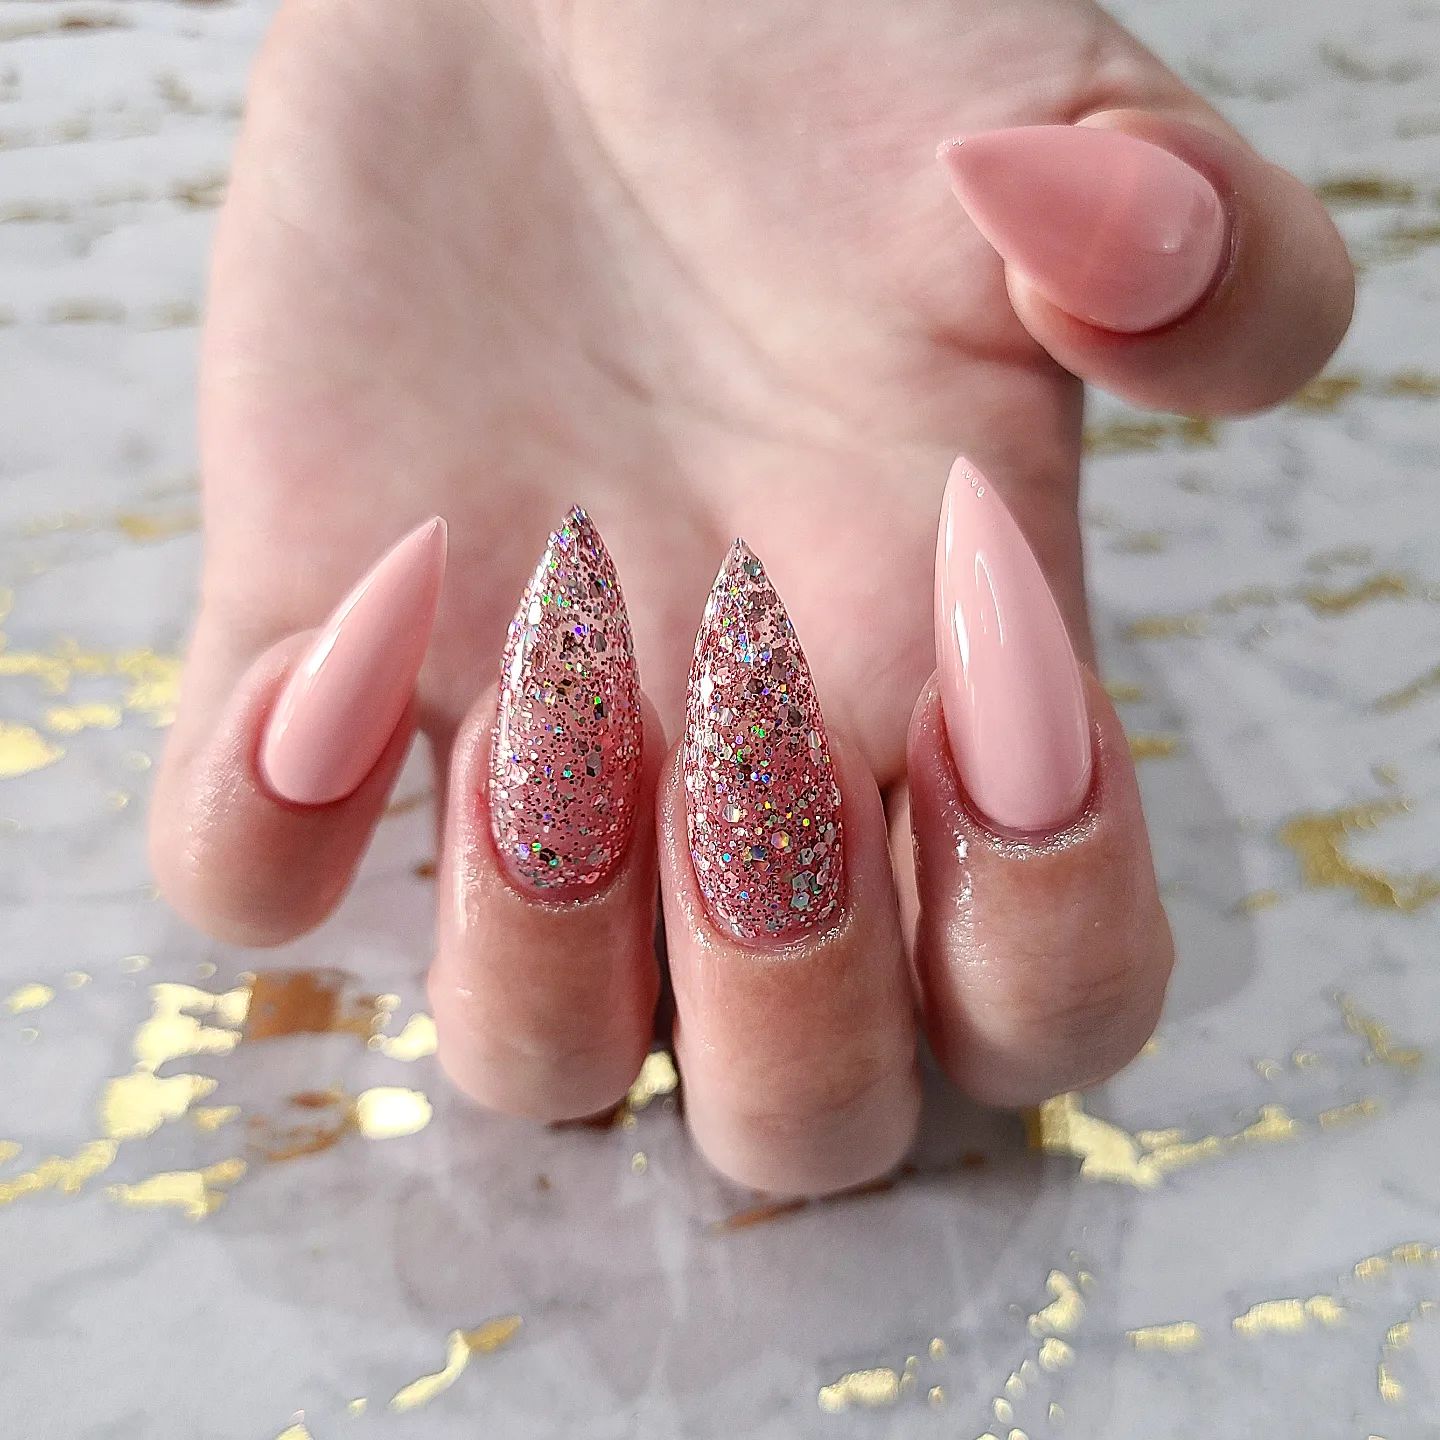 Nude nails are one of the classics but why don't you match this color with a stiletto mani? You can also add some glitters for your accent nails.